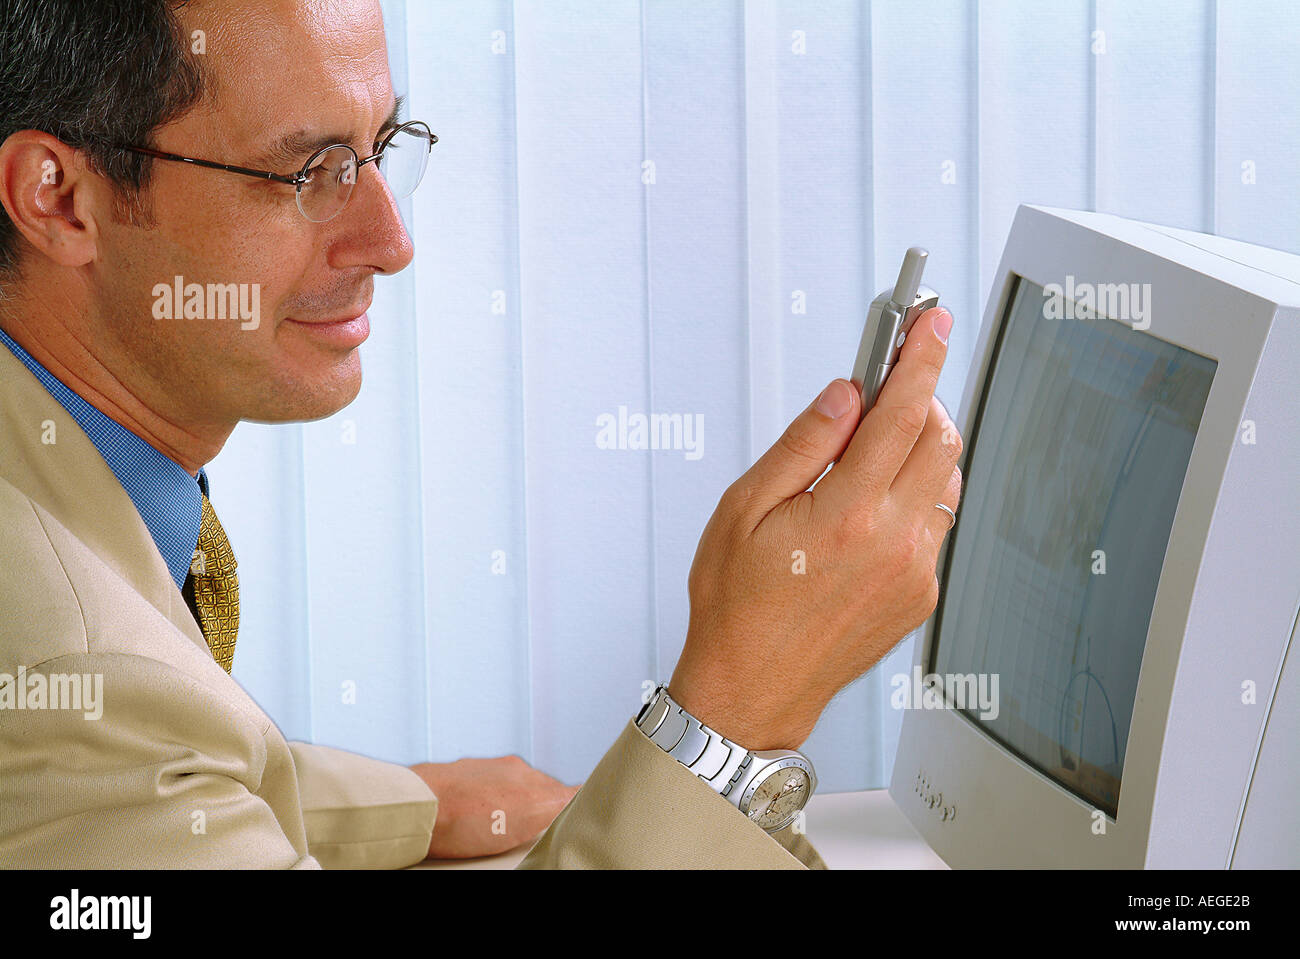 businessman sitting desk computer screen monitor watch cellphone cellular phone mobi blinds looking at business communication pe Stock Photo